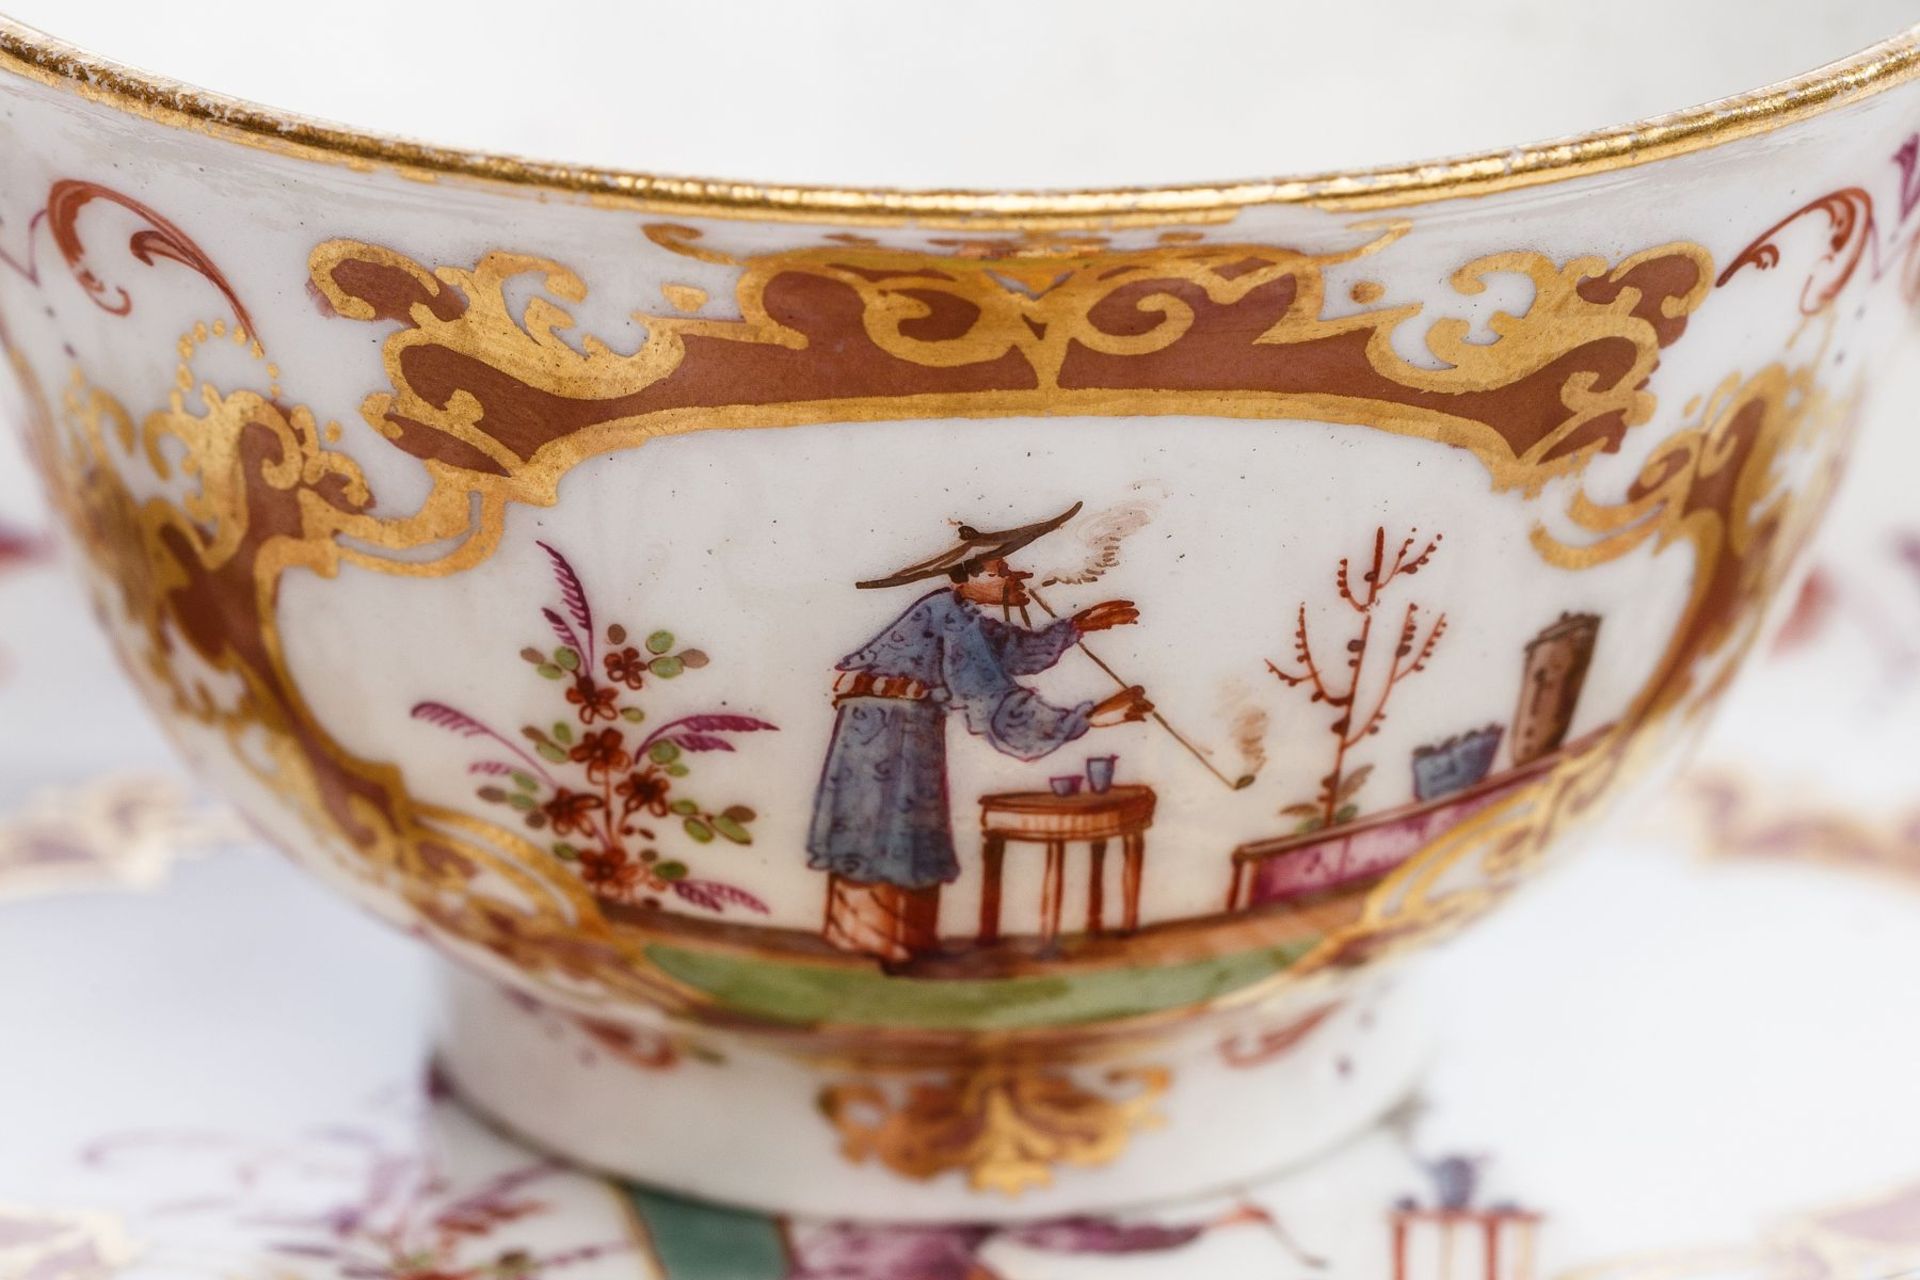 Bowl with Saucer, Meissen 1723/25 - Image 5 of 6